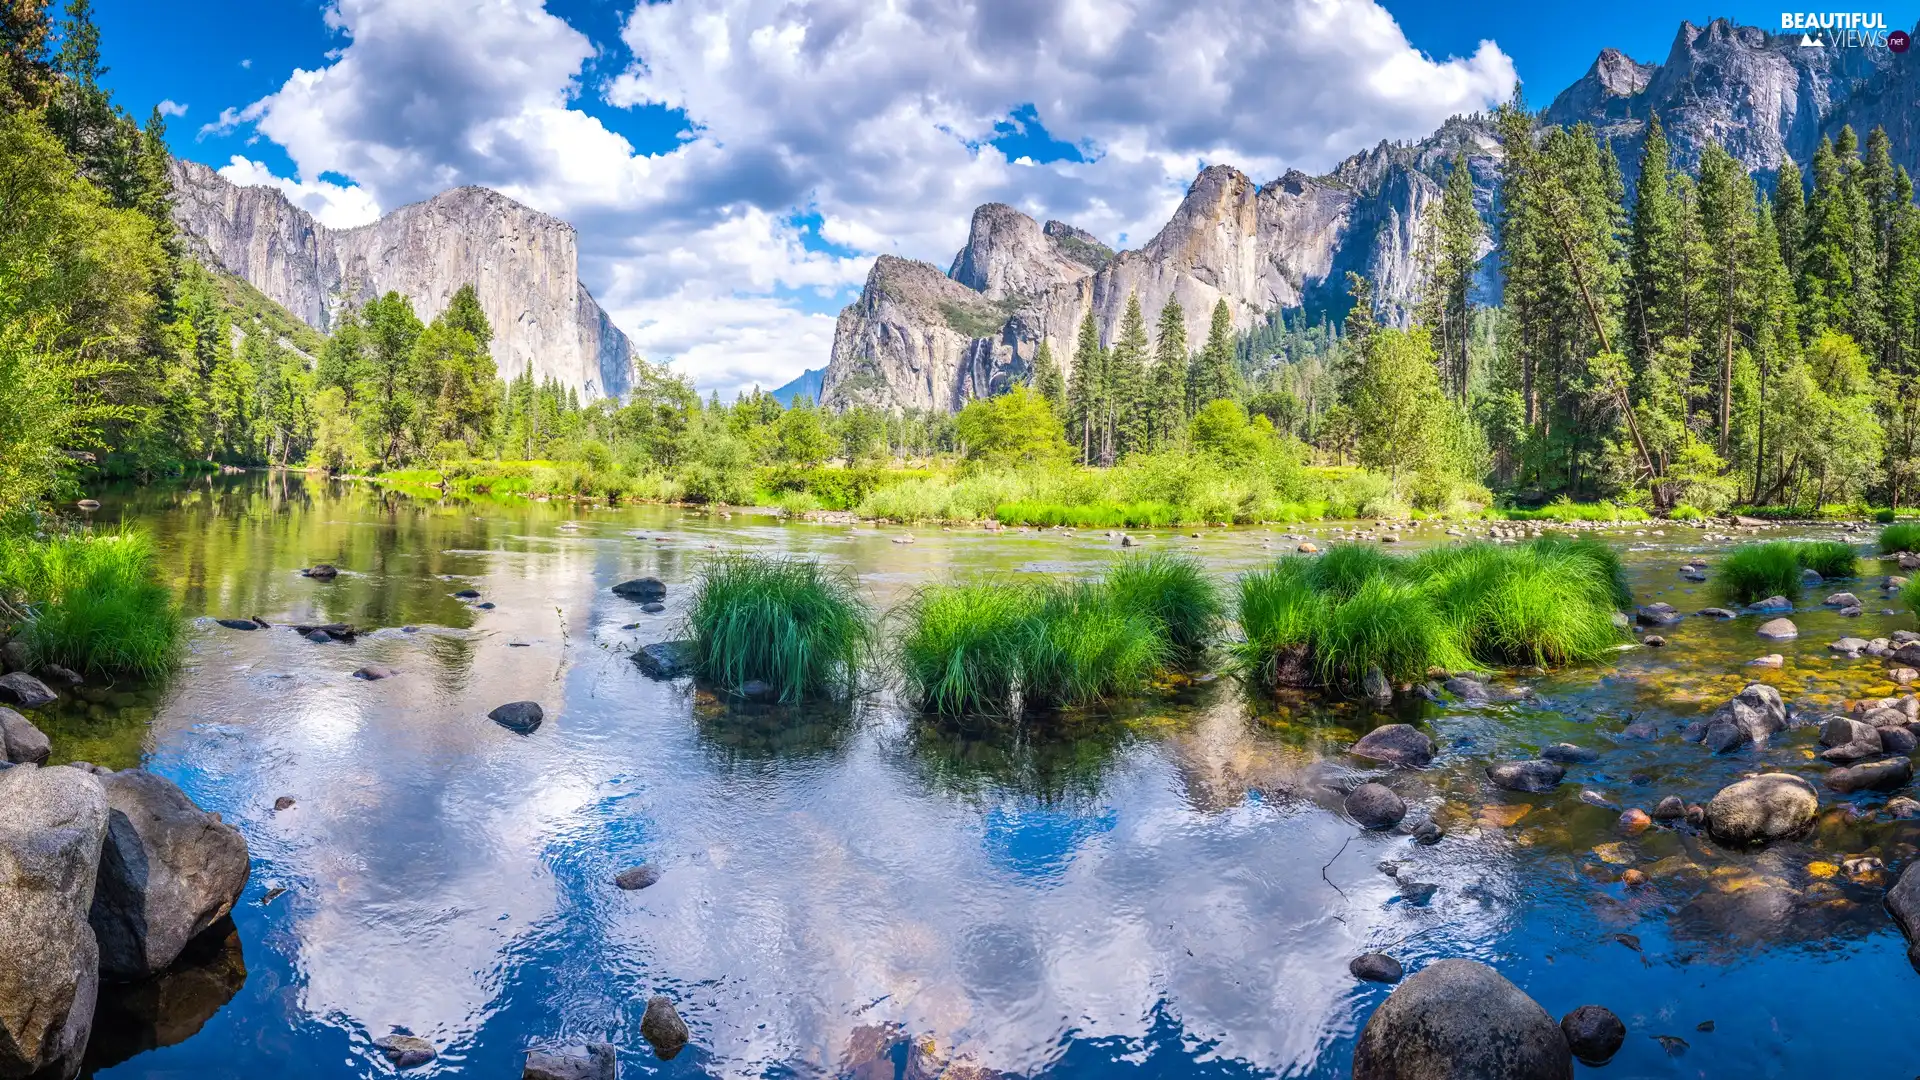 trees, State of California, Green, Sierra Nevada Mountains, grass, The United States, Yosemite National Park, clouds, viewes, Merced River